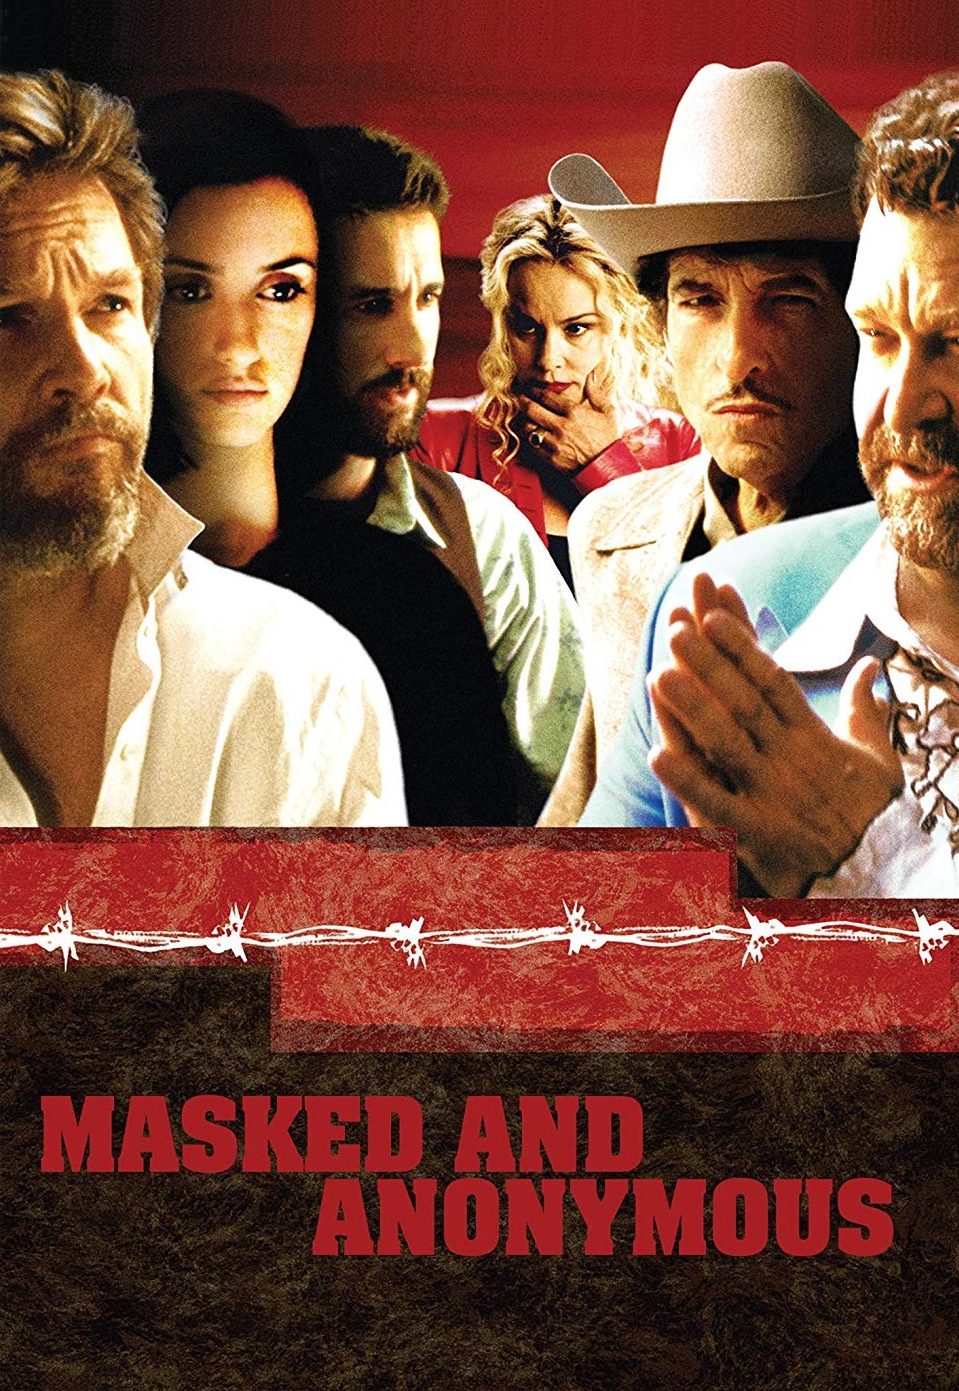 Masked and Anonymous [HD] (2003)